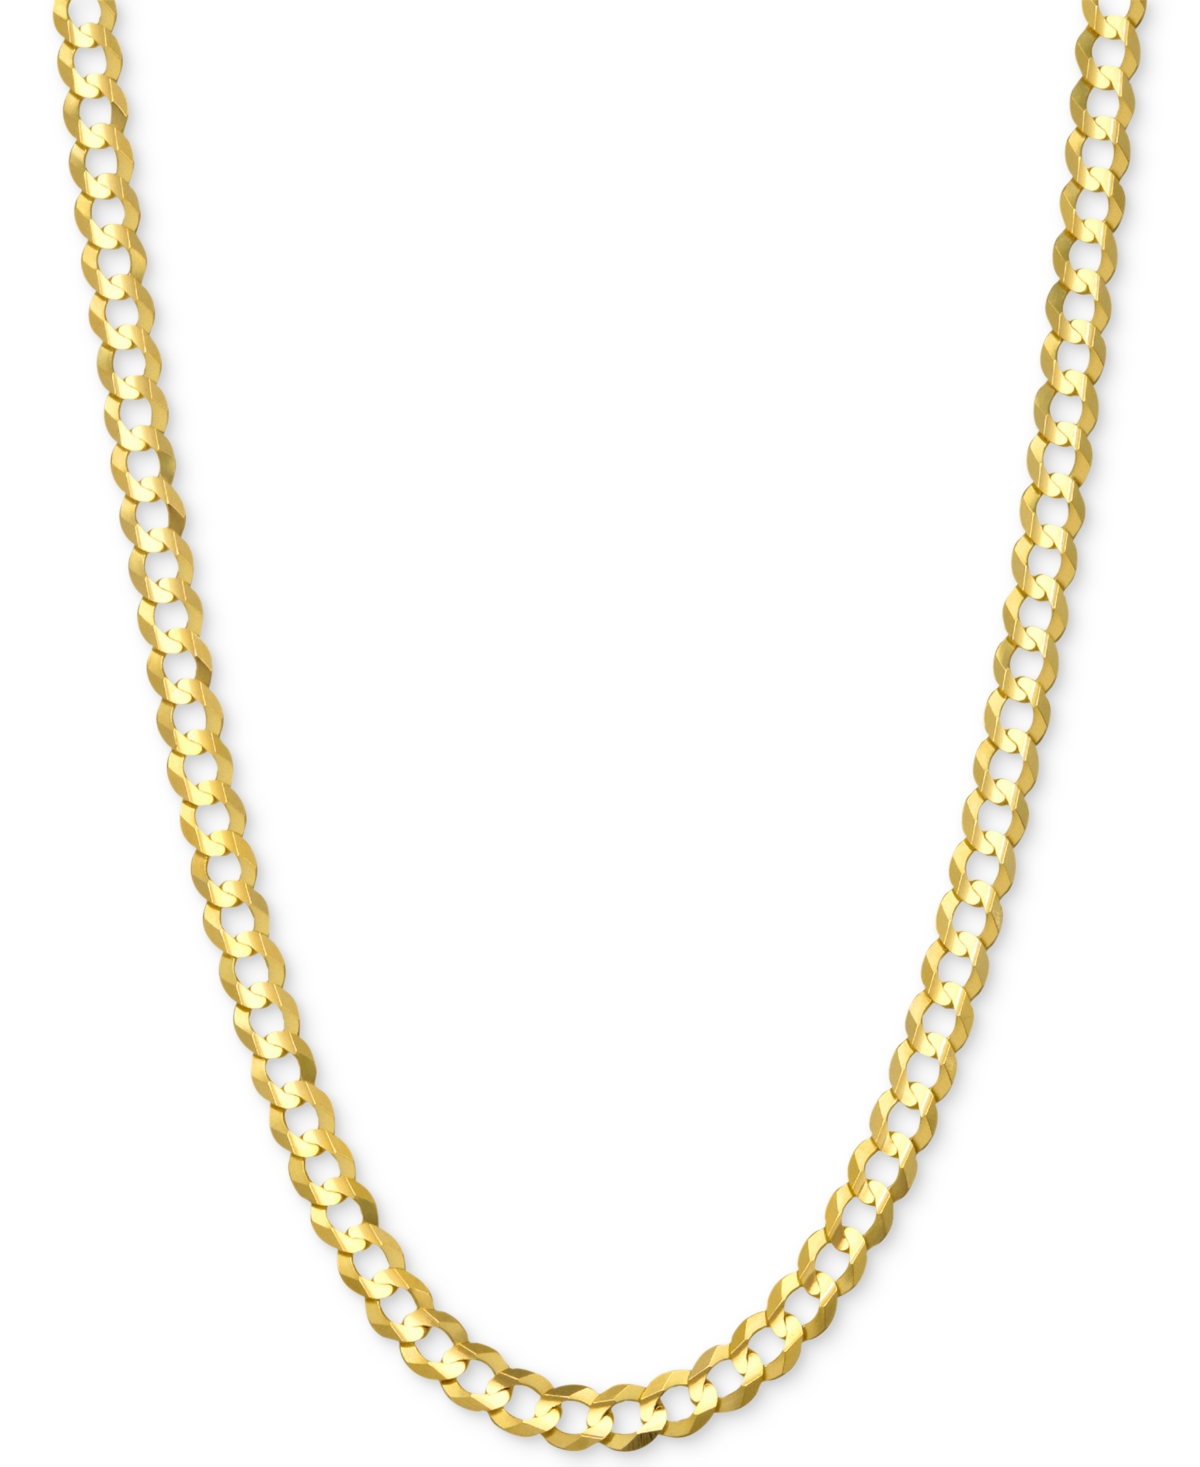 Italian Gold 18" Open Curb Link Chain Necklace (3-5/8mm) In Solid 14k Gold